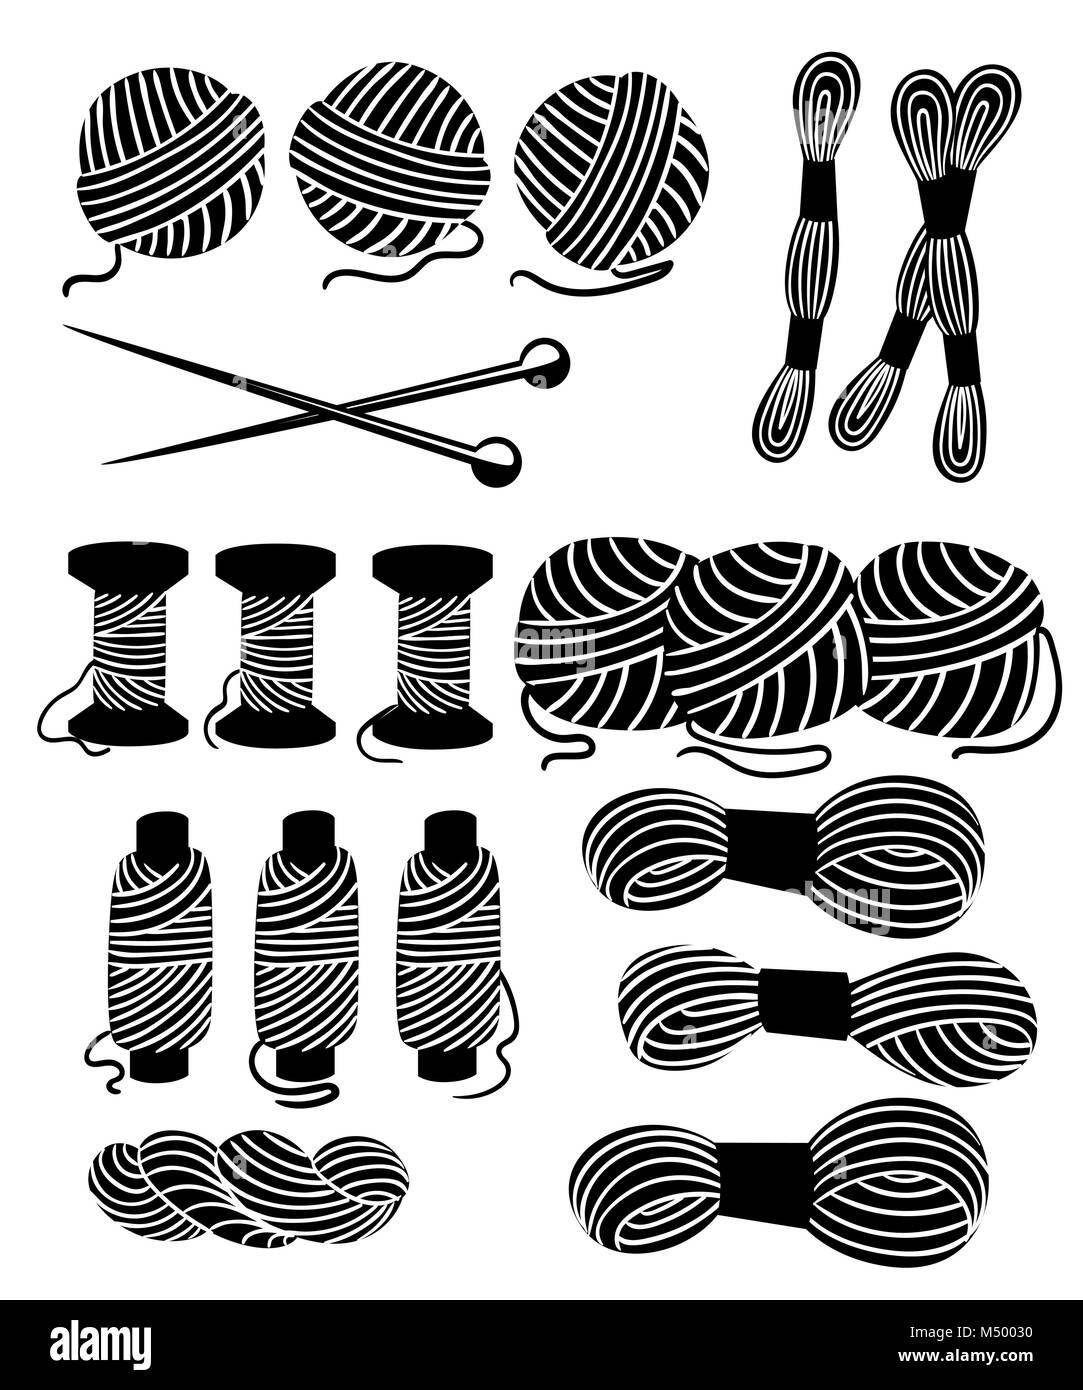 Knitting Needles Wool Black And White Stock Photos Images